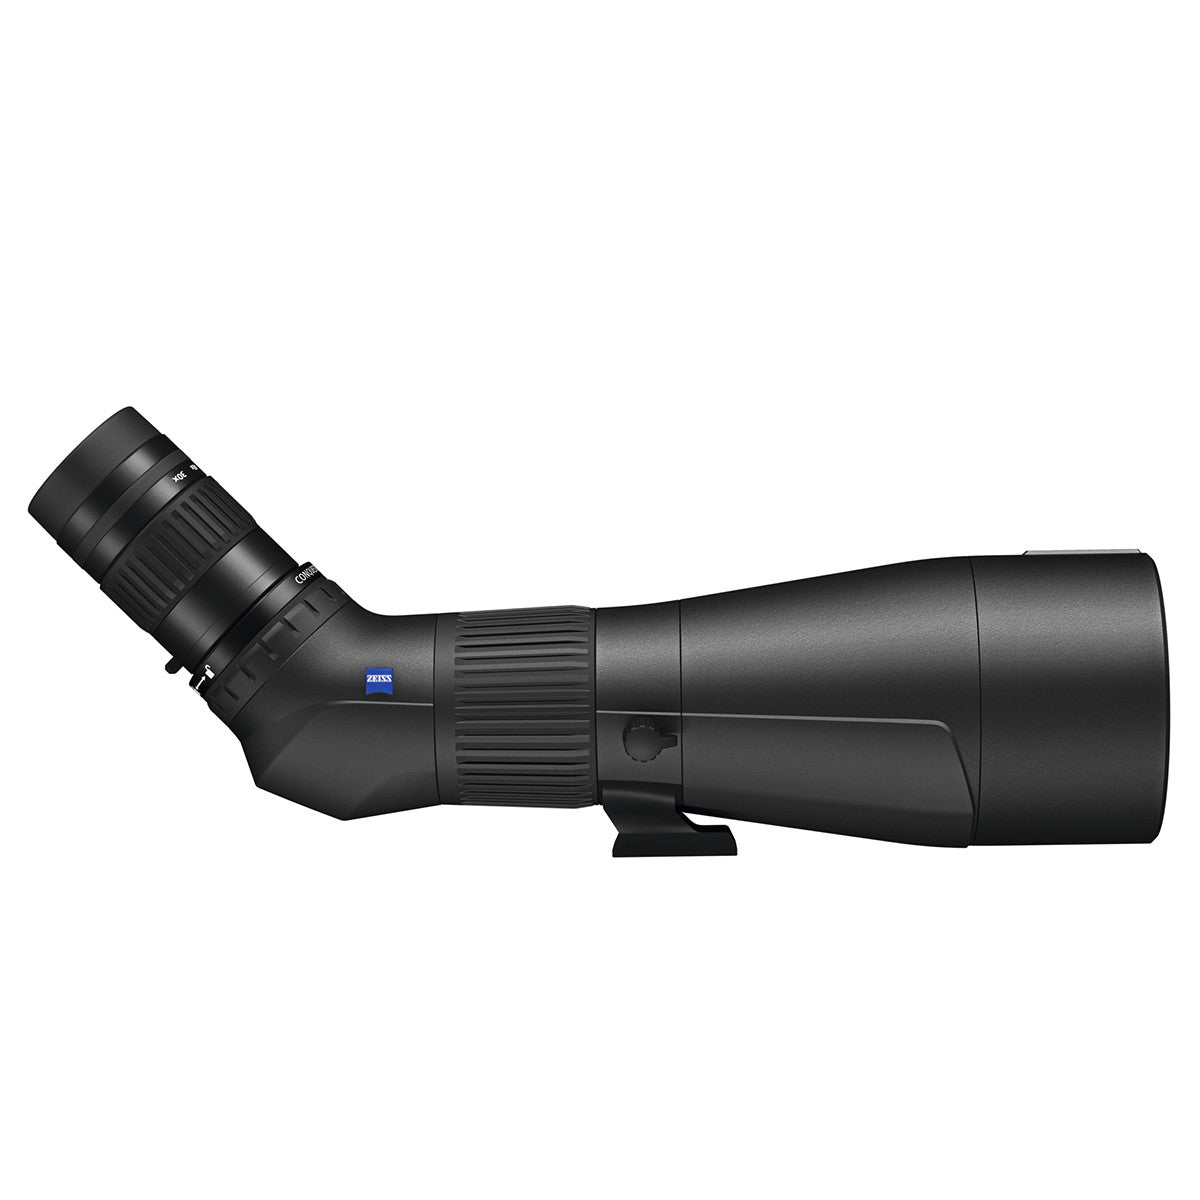 Zeiss Conquest Gavia 30-60x85 Angled Spotting Scope in Zeiss Conquest Gavia 30-60x85 Angled Spotting Scope - goHUNT Shop by GOHUNT | Zeiss - GOHUNT Shop